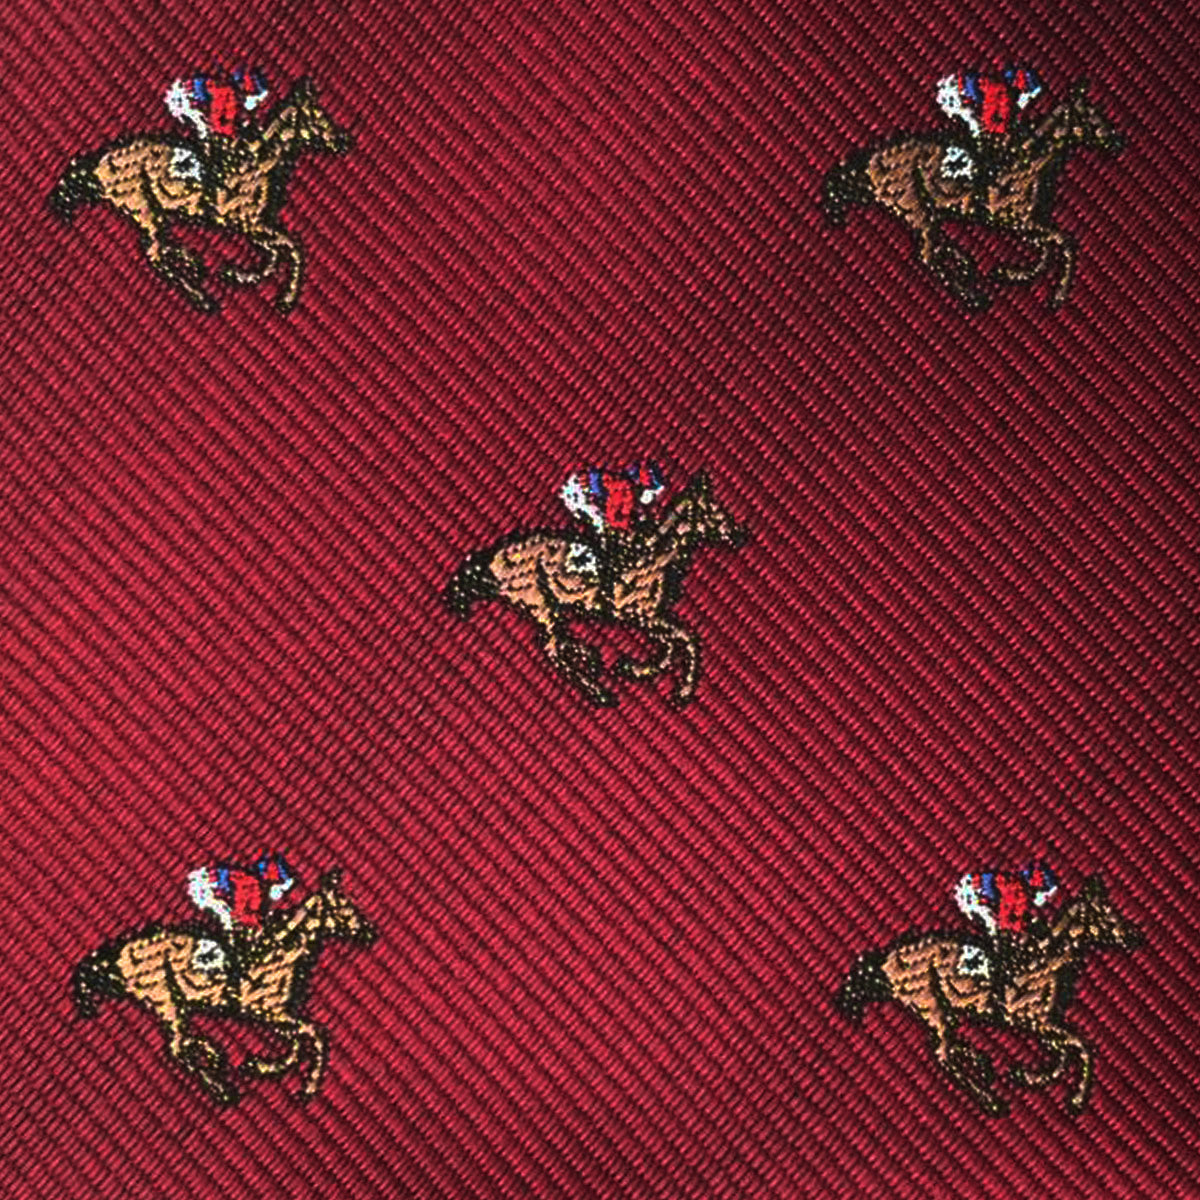 The Royal Ascot Racehorse Skinny Tie Fabric